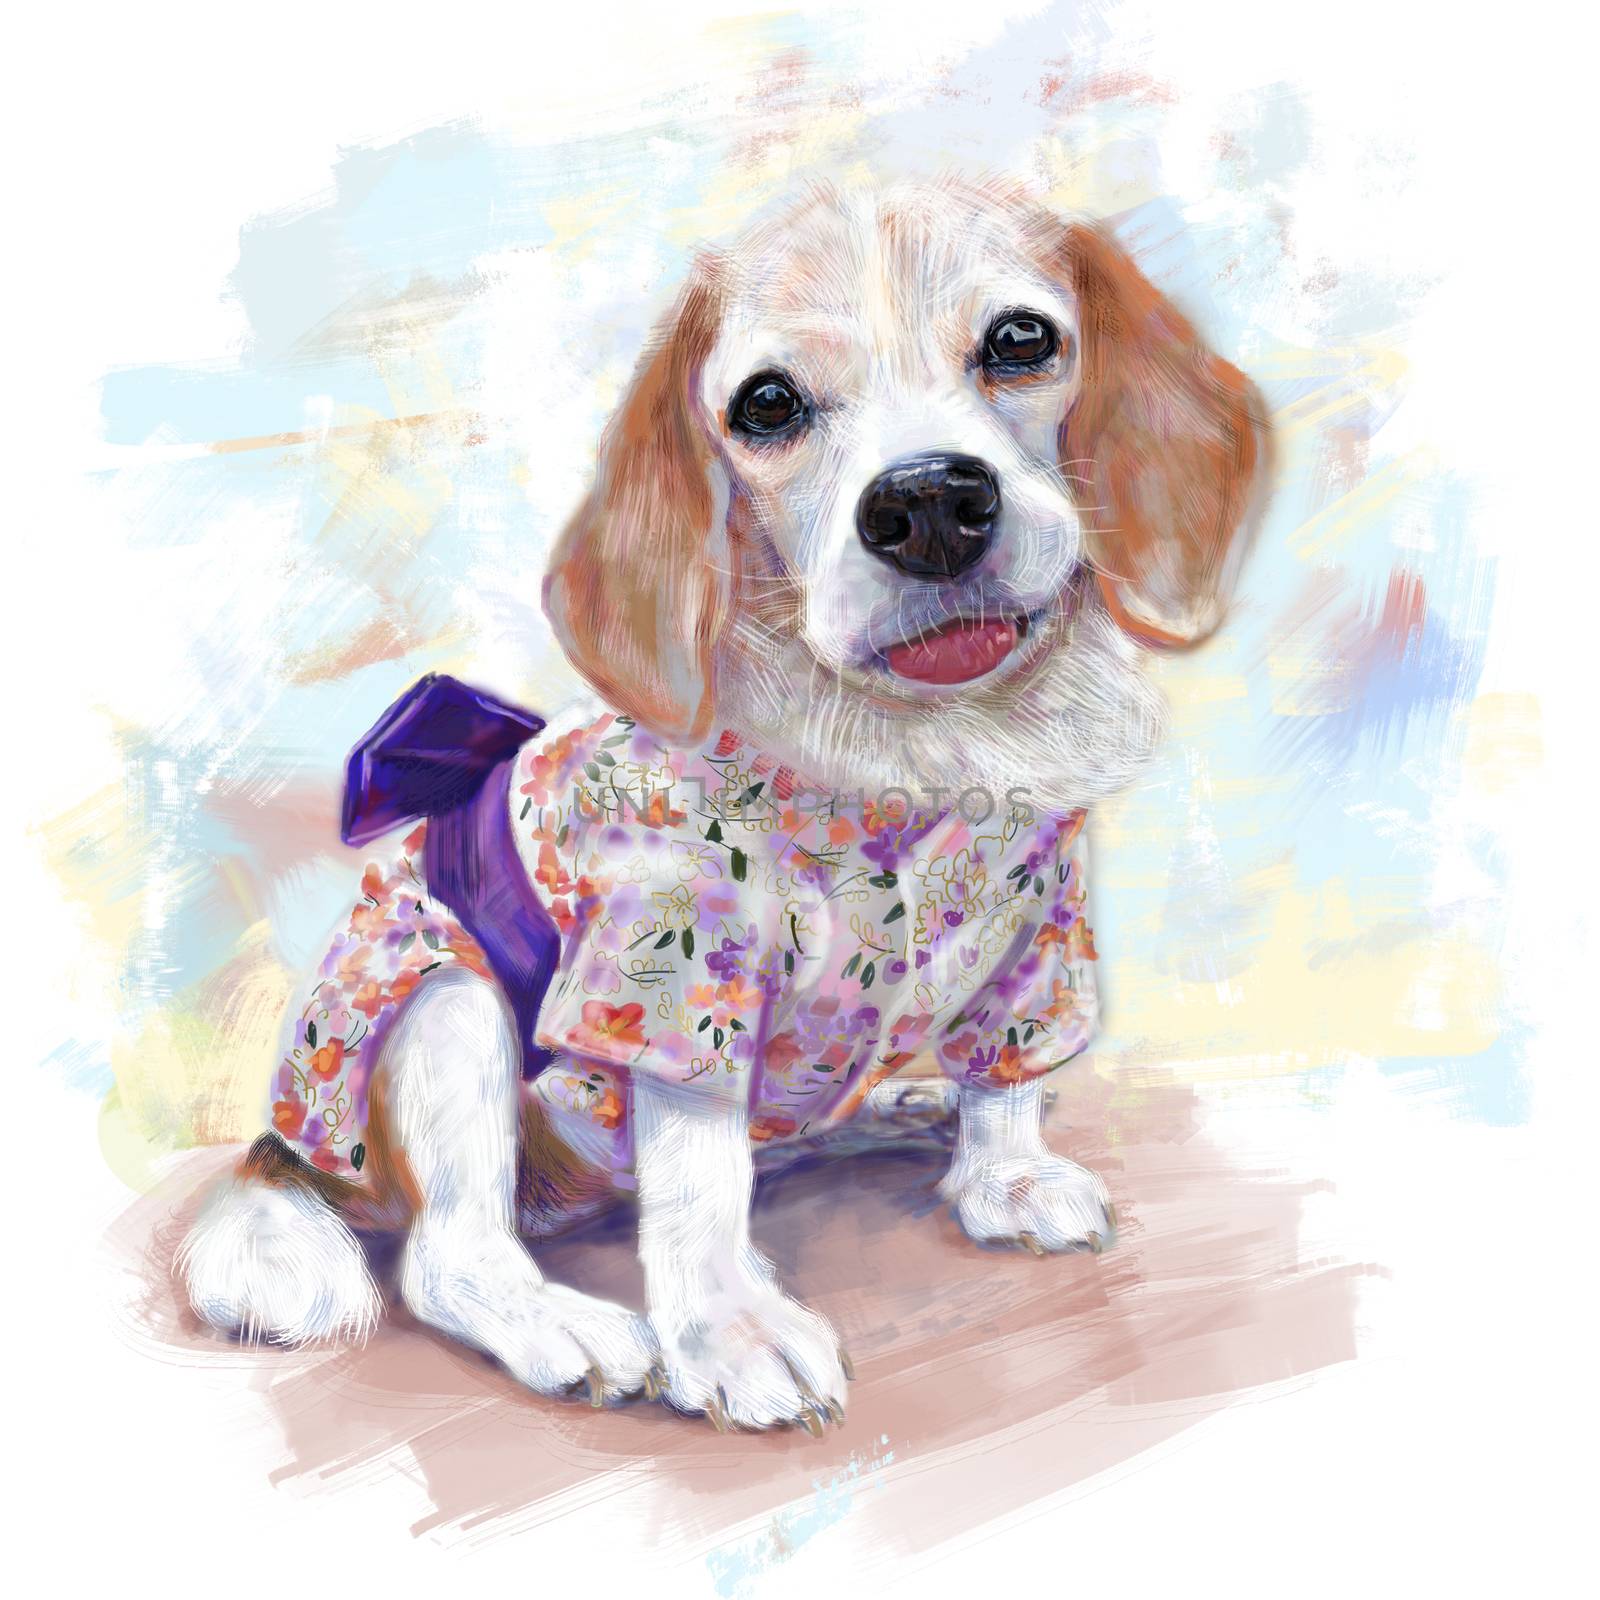 Lovely beagle wearing cute costumes. by hadkhanong